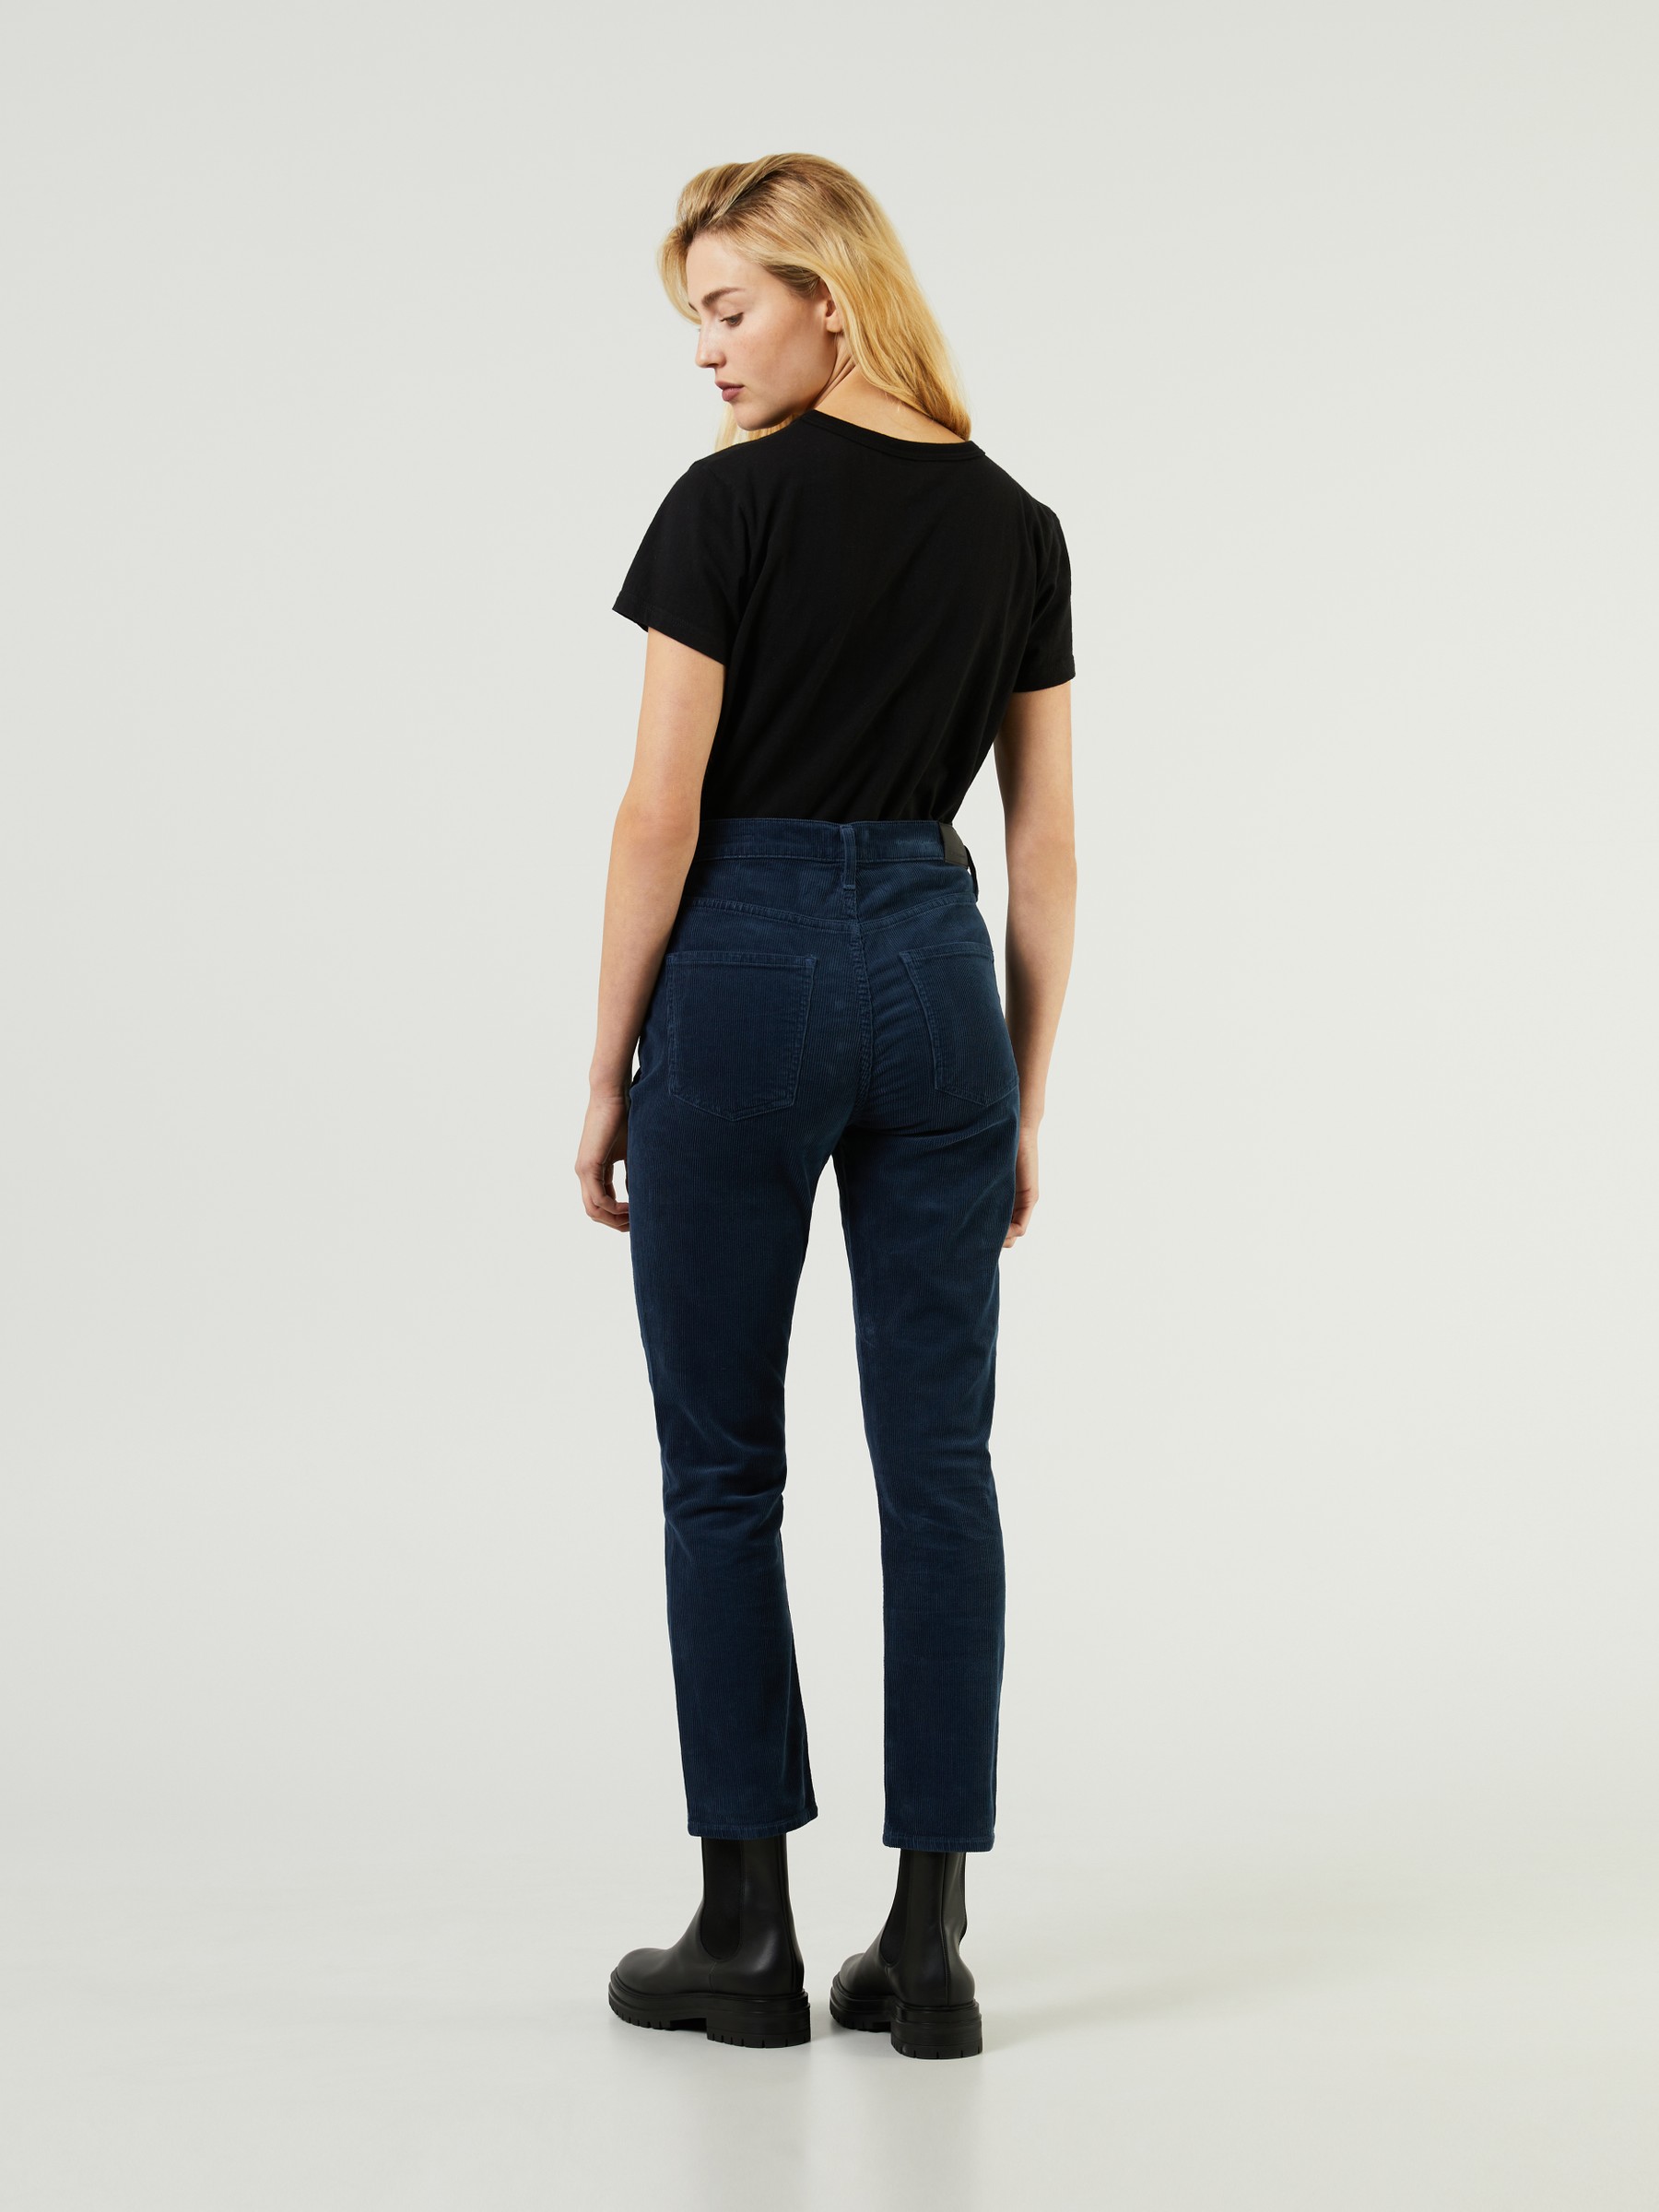 Citizens of Humanity Slim-Fit Cordhose 'Jolene High Rise Vintage' Navy Blue  | Slim and Skinny Fit Jeans